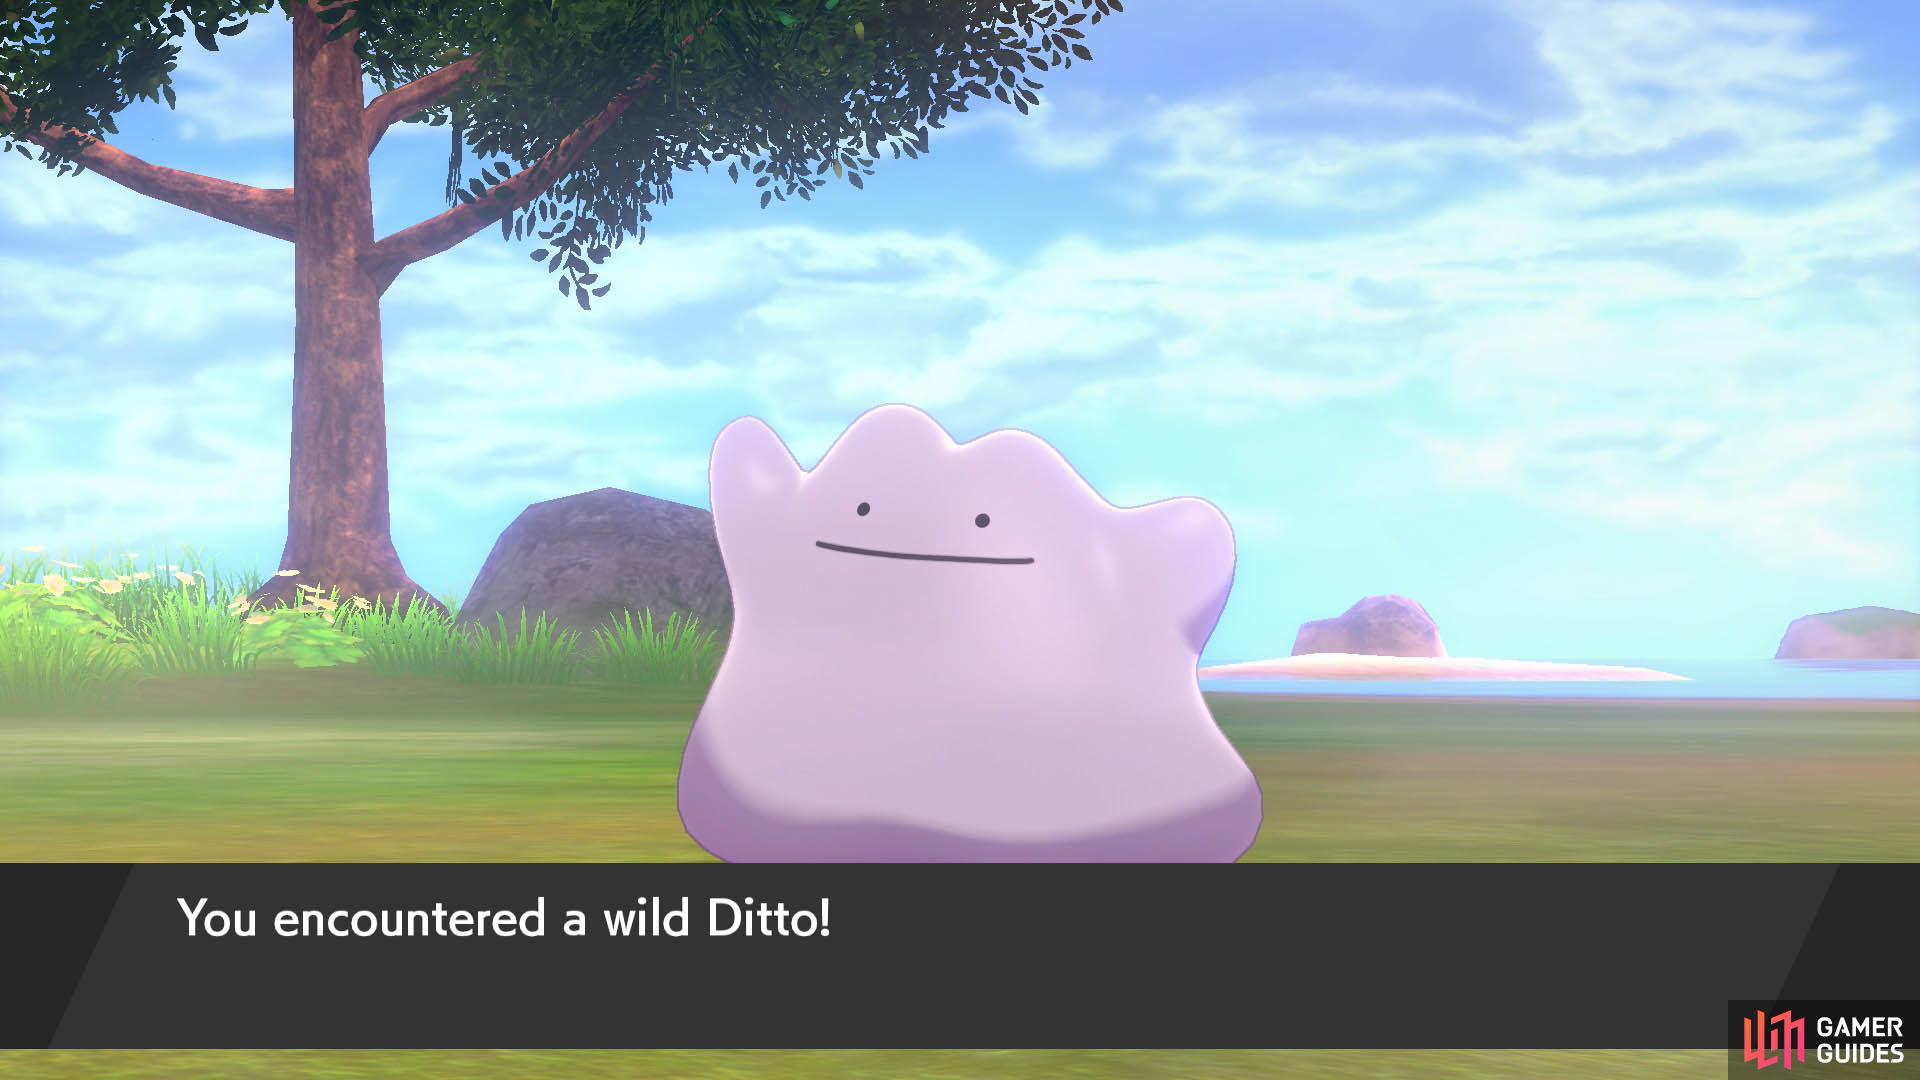 Ditto can breed with any Pokémon that can normally breed. For some Pokémon without genders, Ditto is required to breed them.